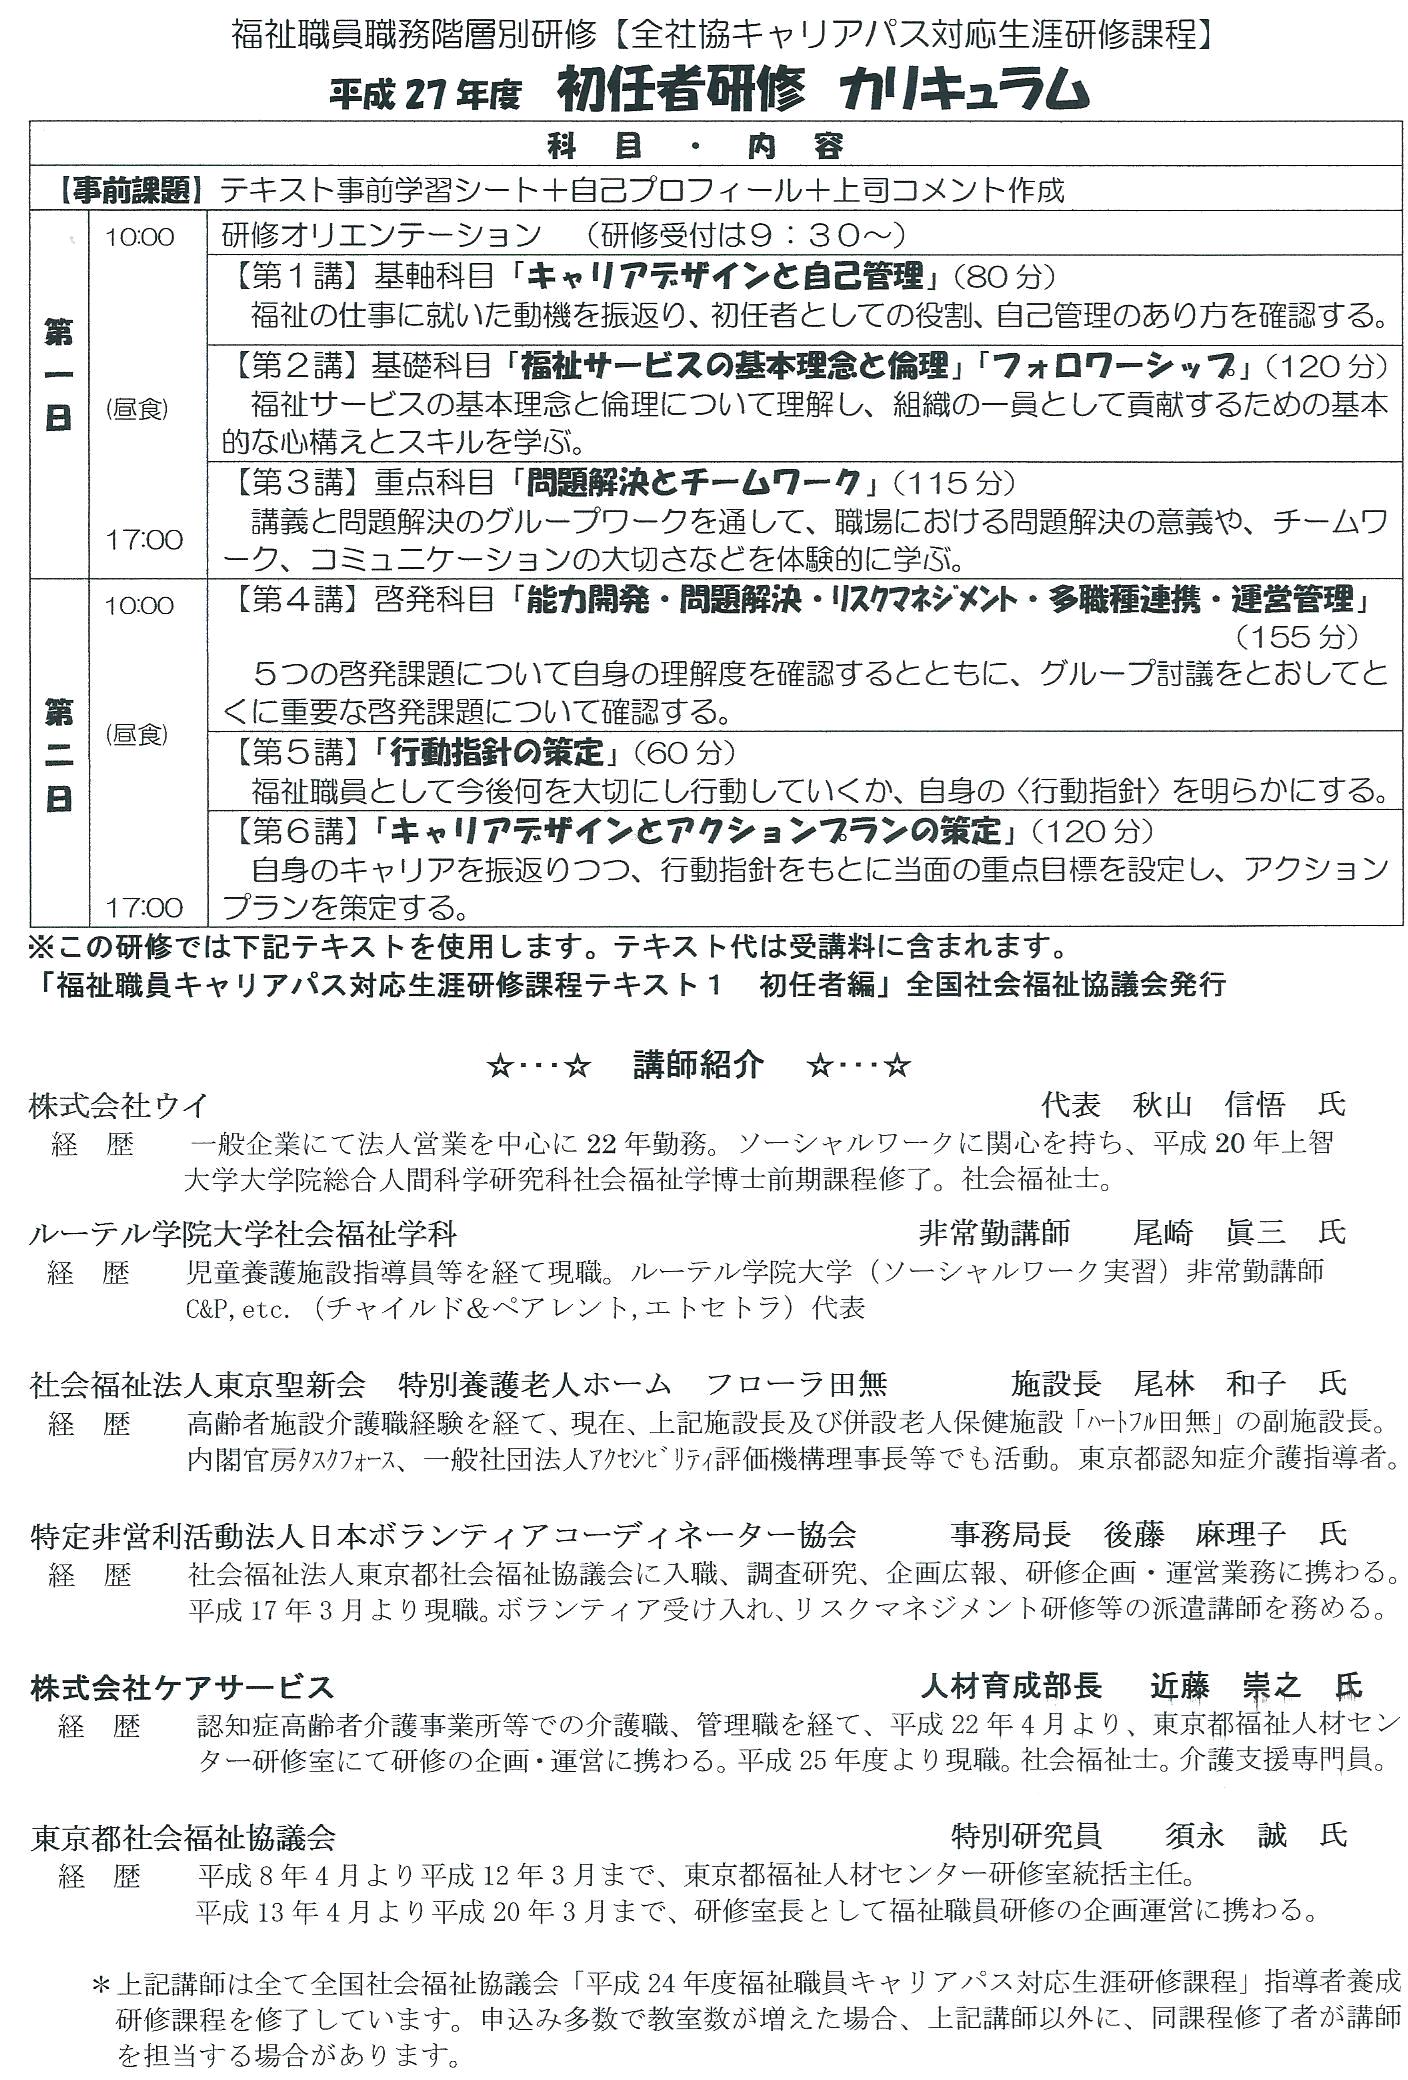 Tokyo decided "The training for the junior staff of social welfare" of the next fiscal year.